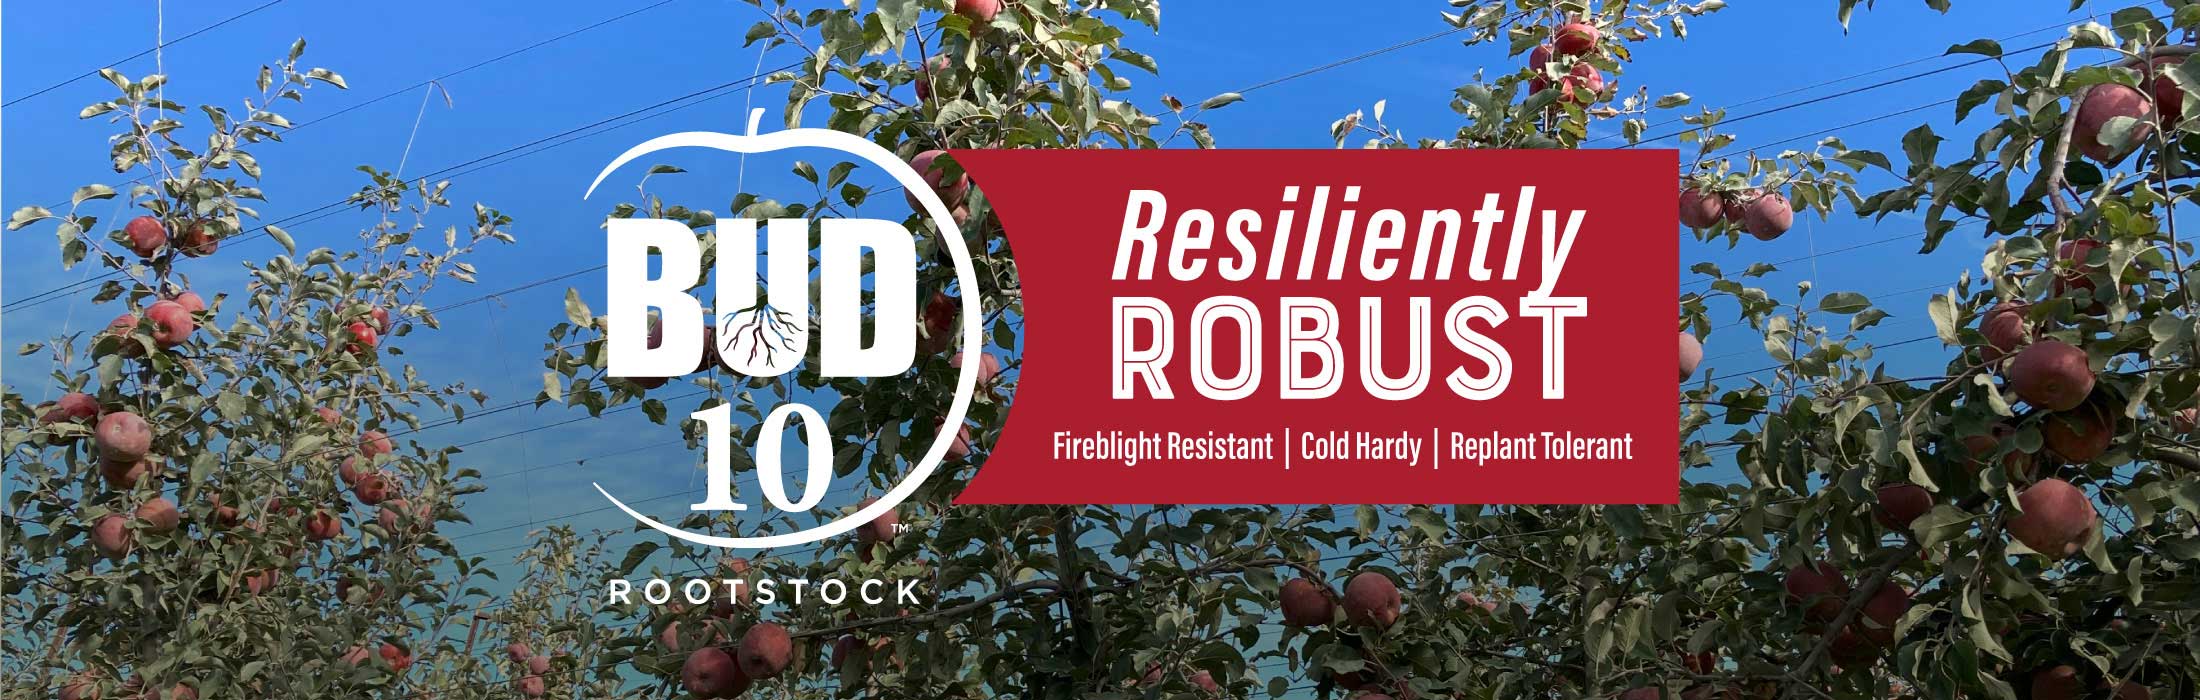 Bud 10 Rootstock • Resiliently ROBUST • From Tree Connection